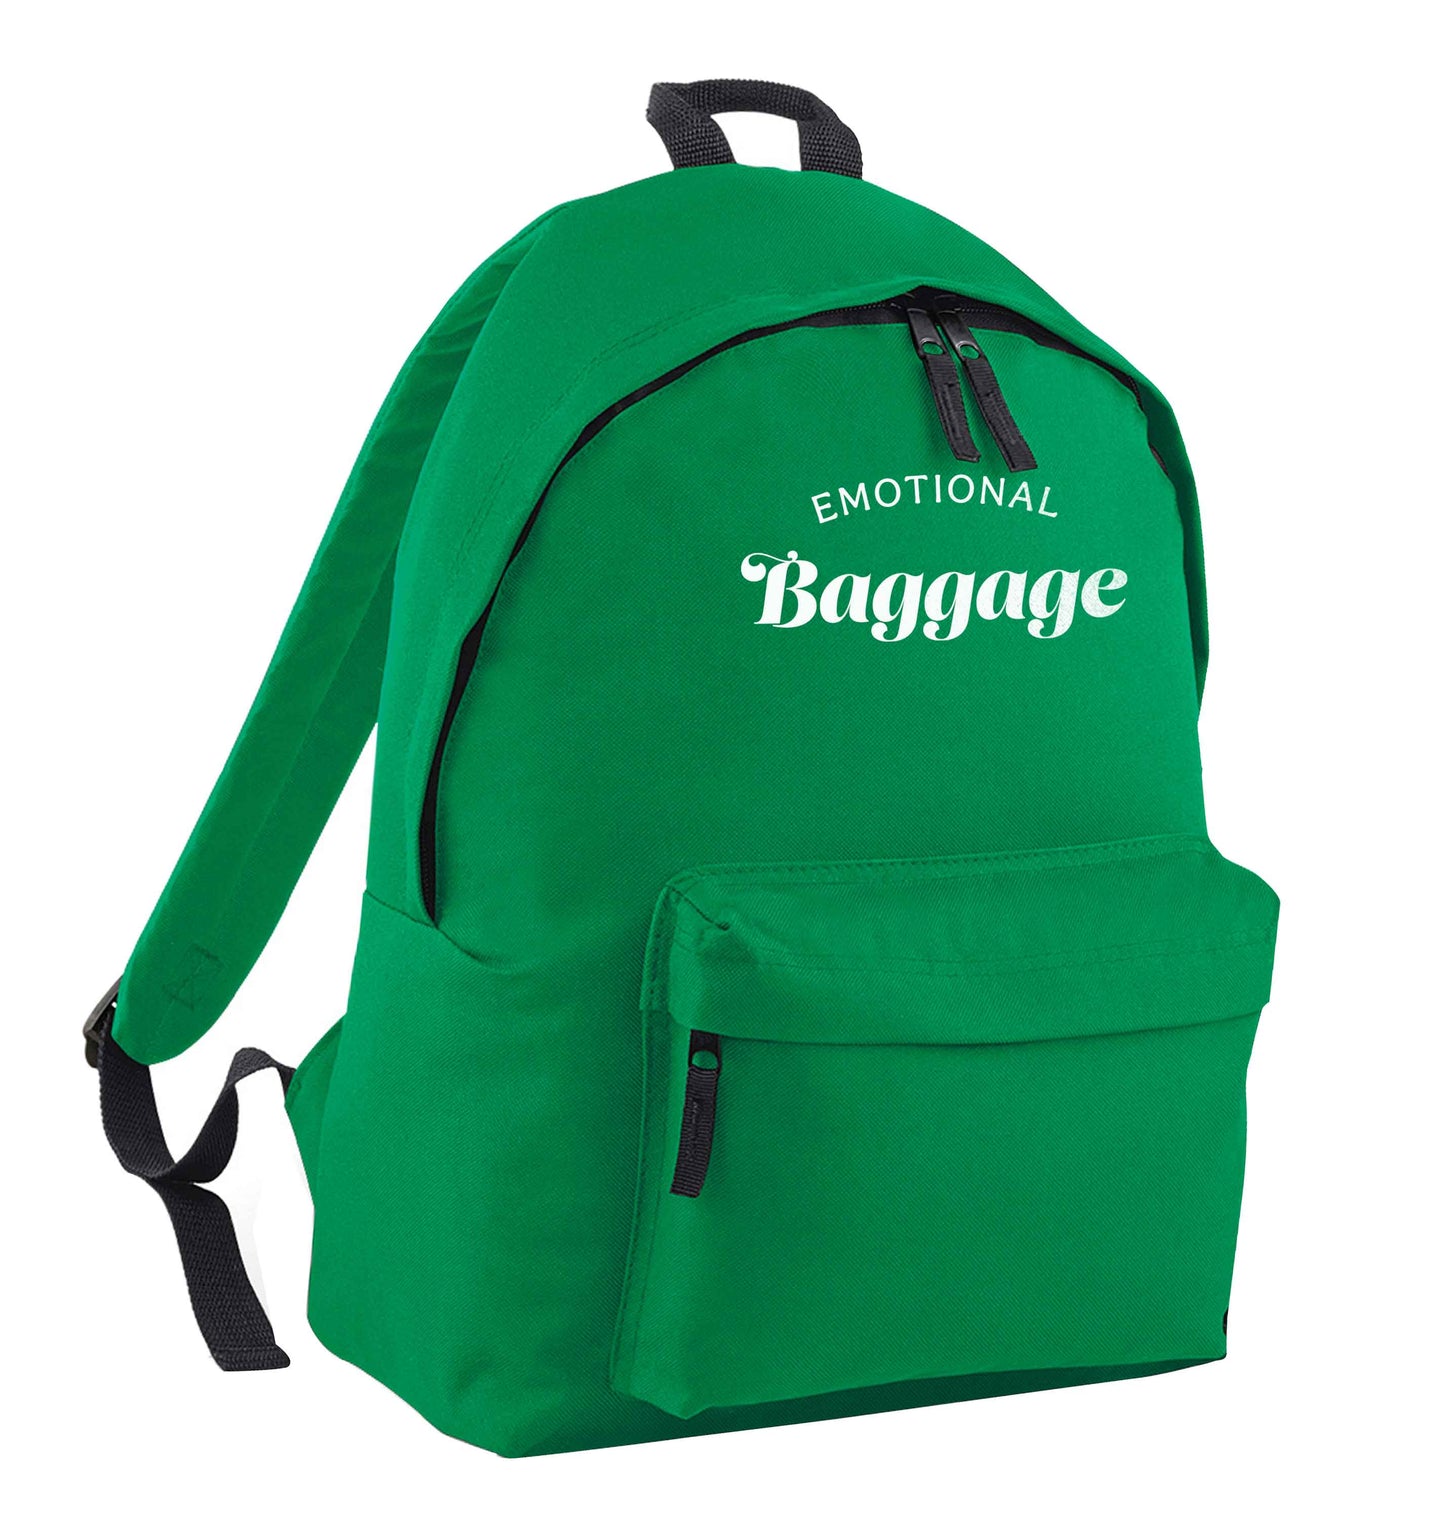 Emotional baggage green adults backpack